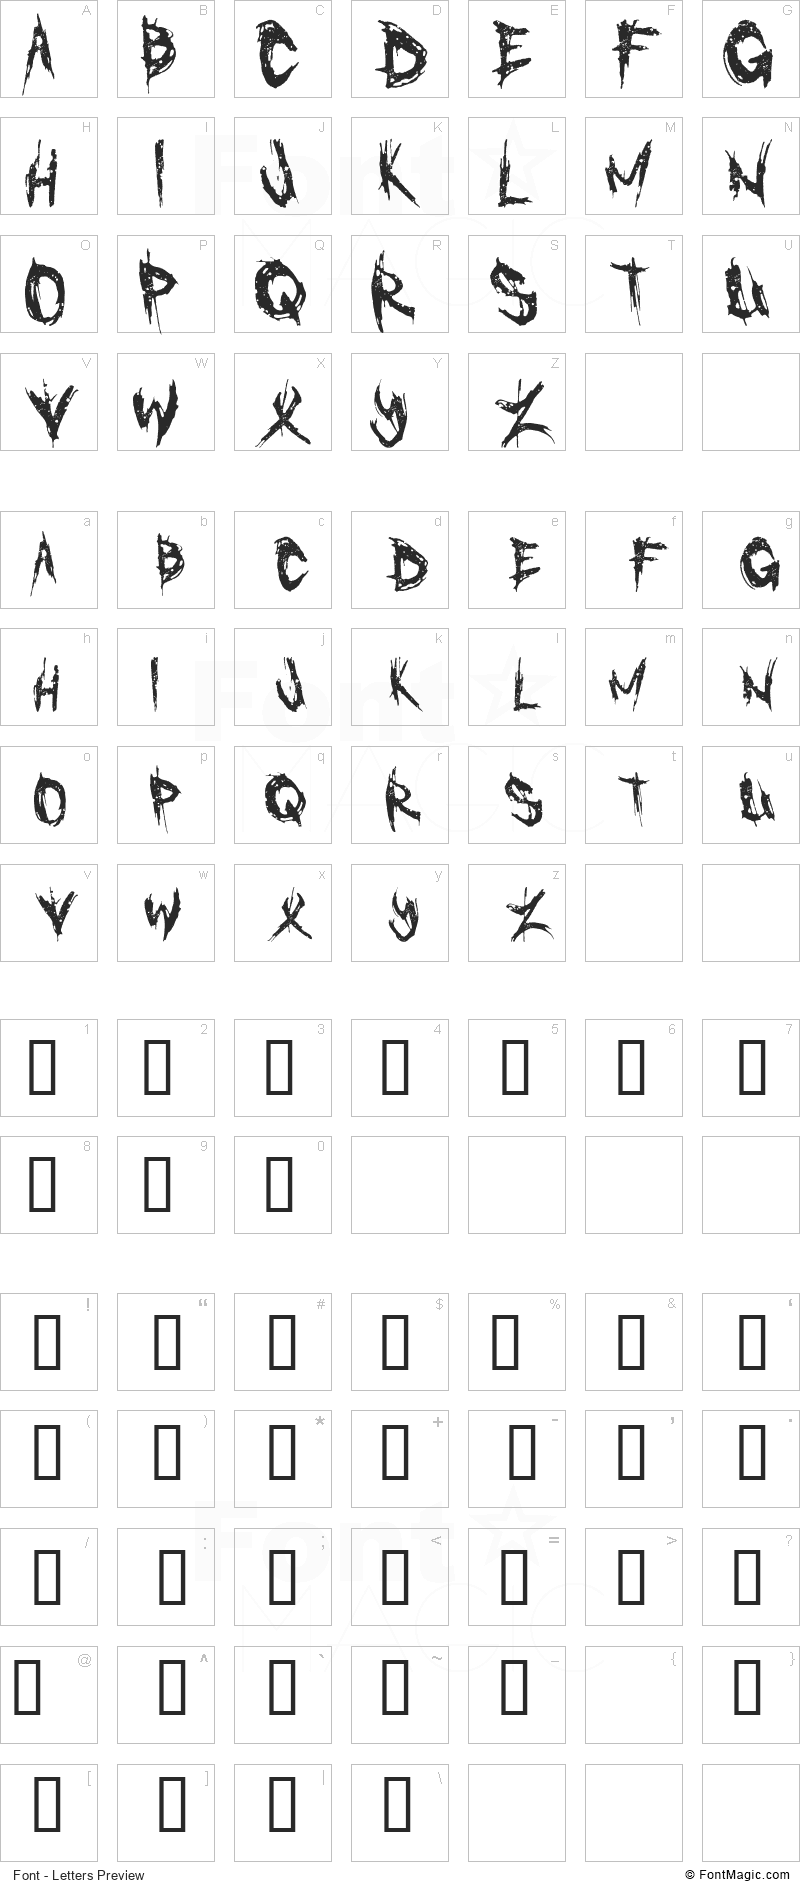 Cannibal Font - All Latters Preview Chart